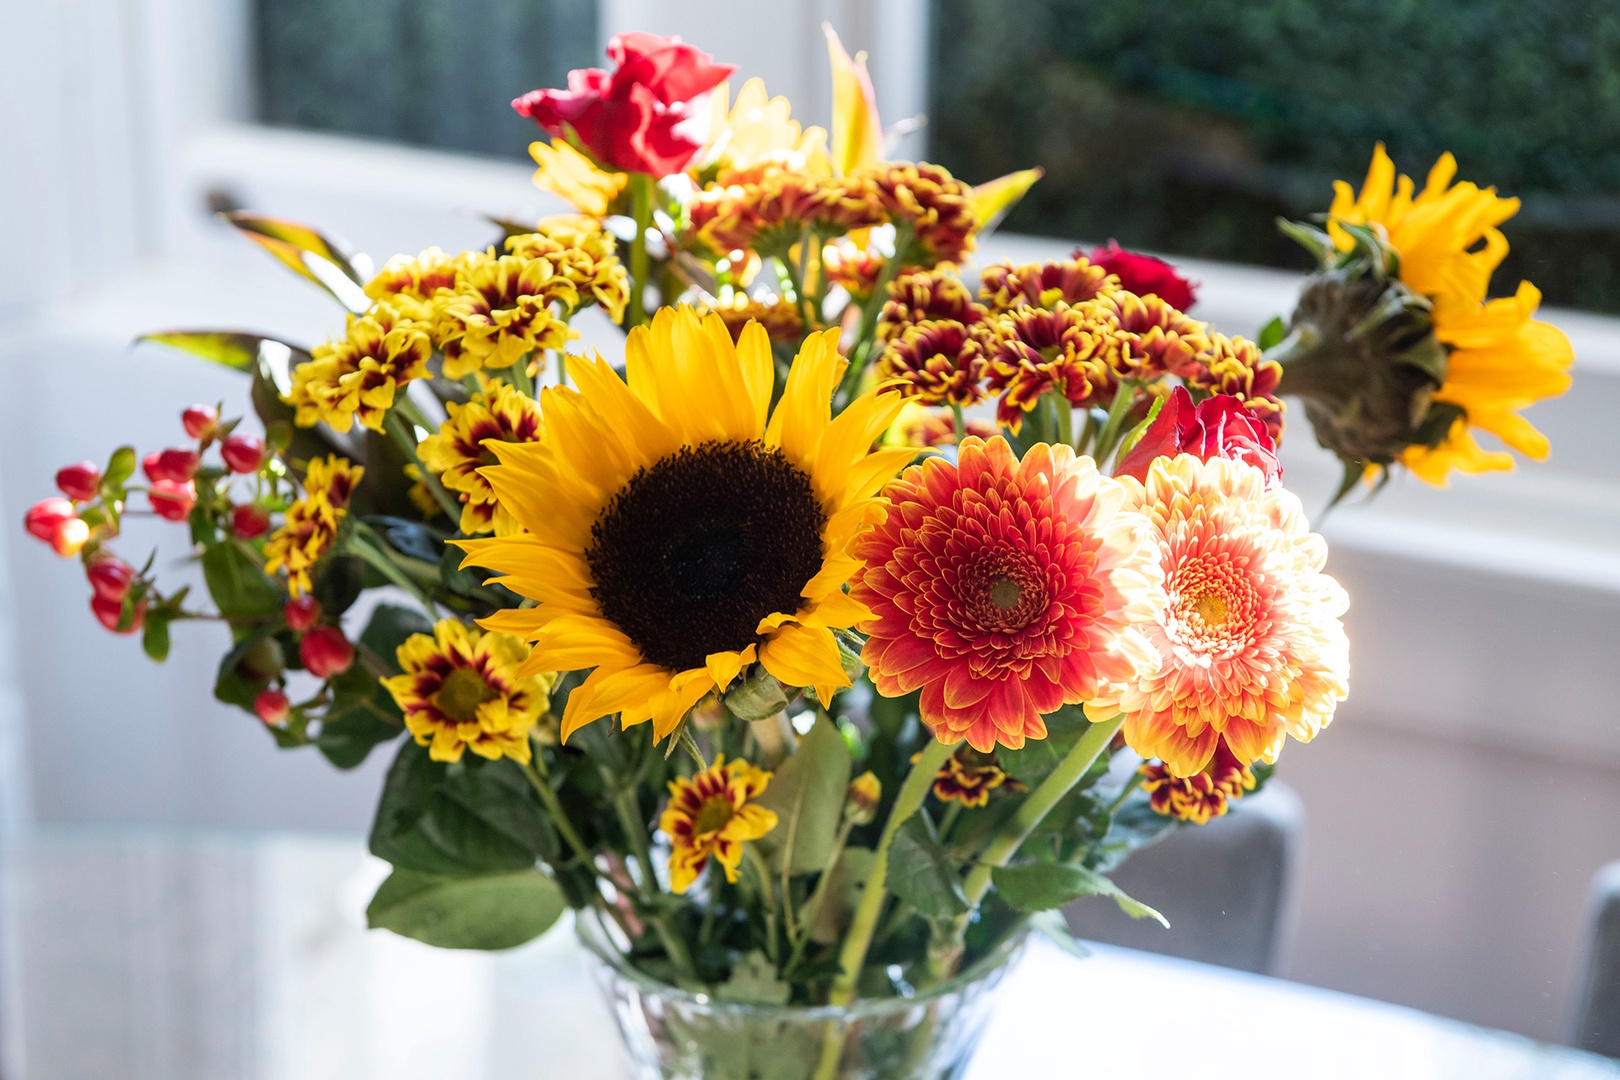 Stop by a local florist and enjoy your meals surrounded by beautiful flowers.